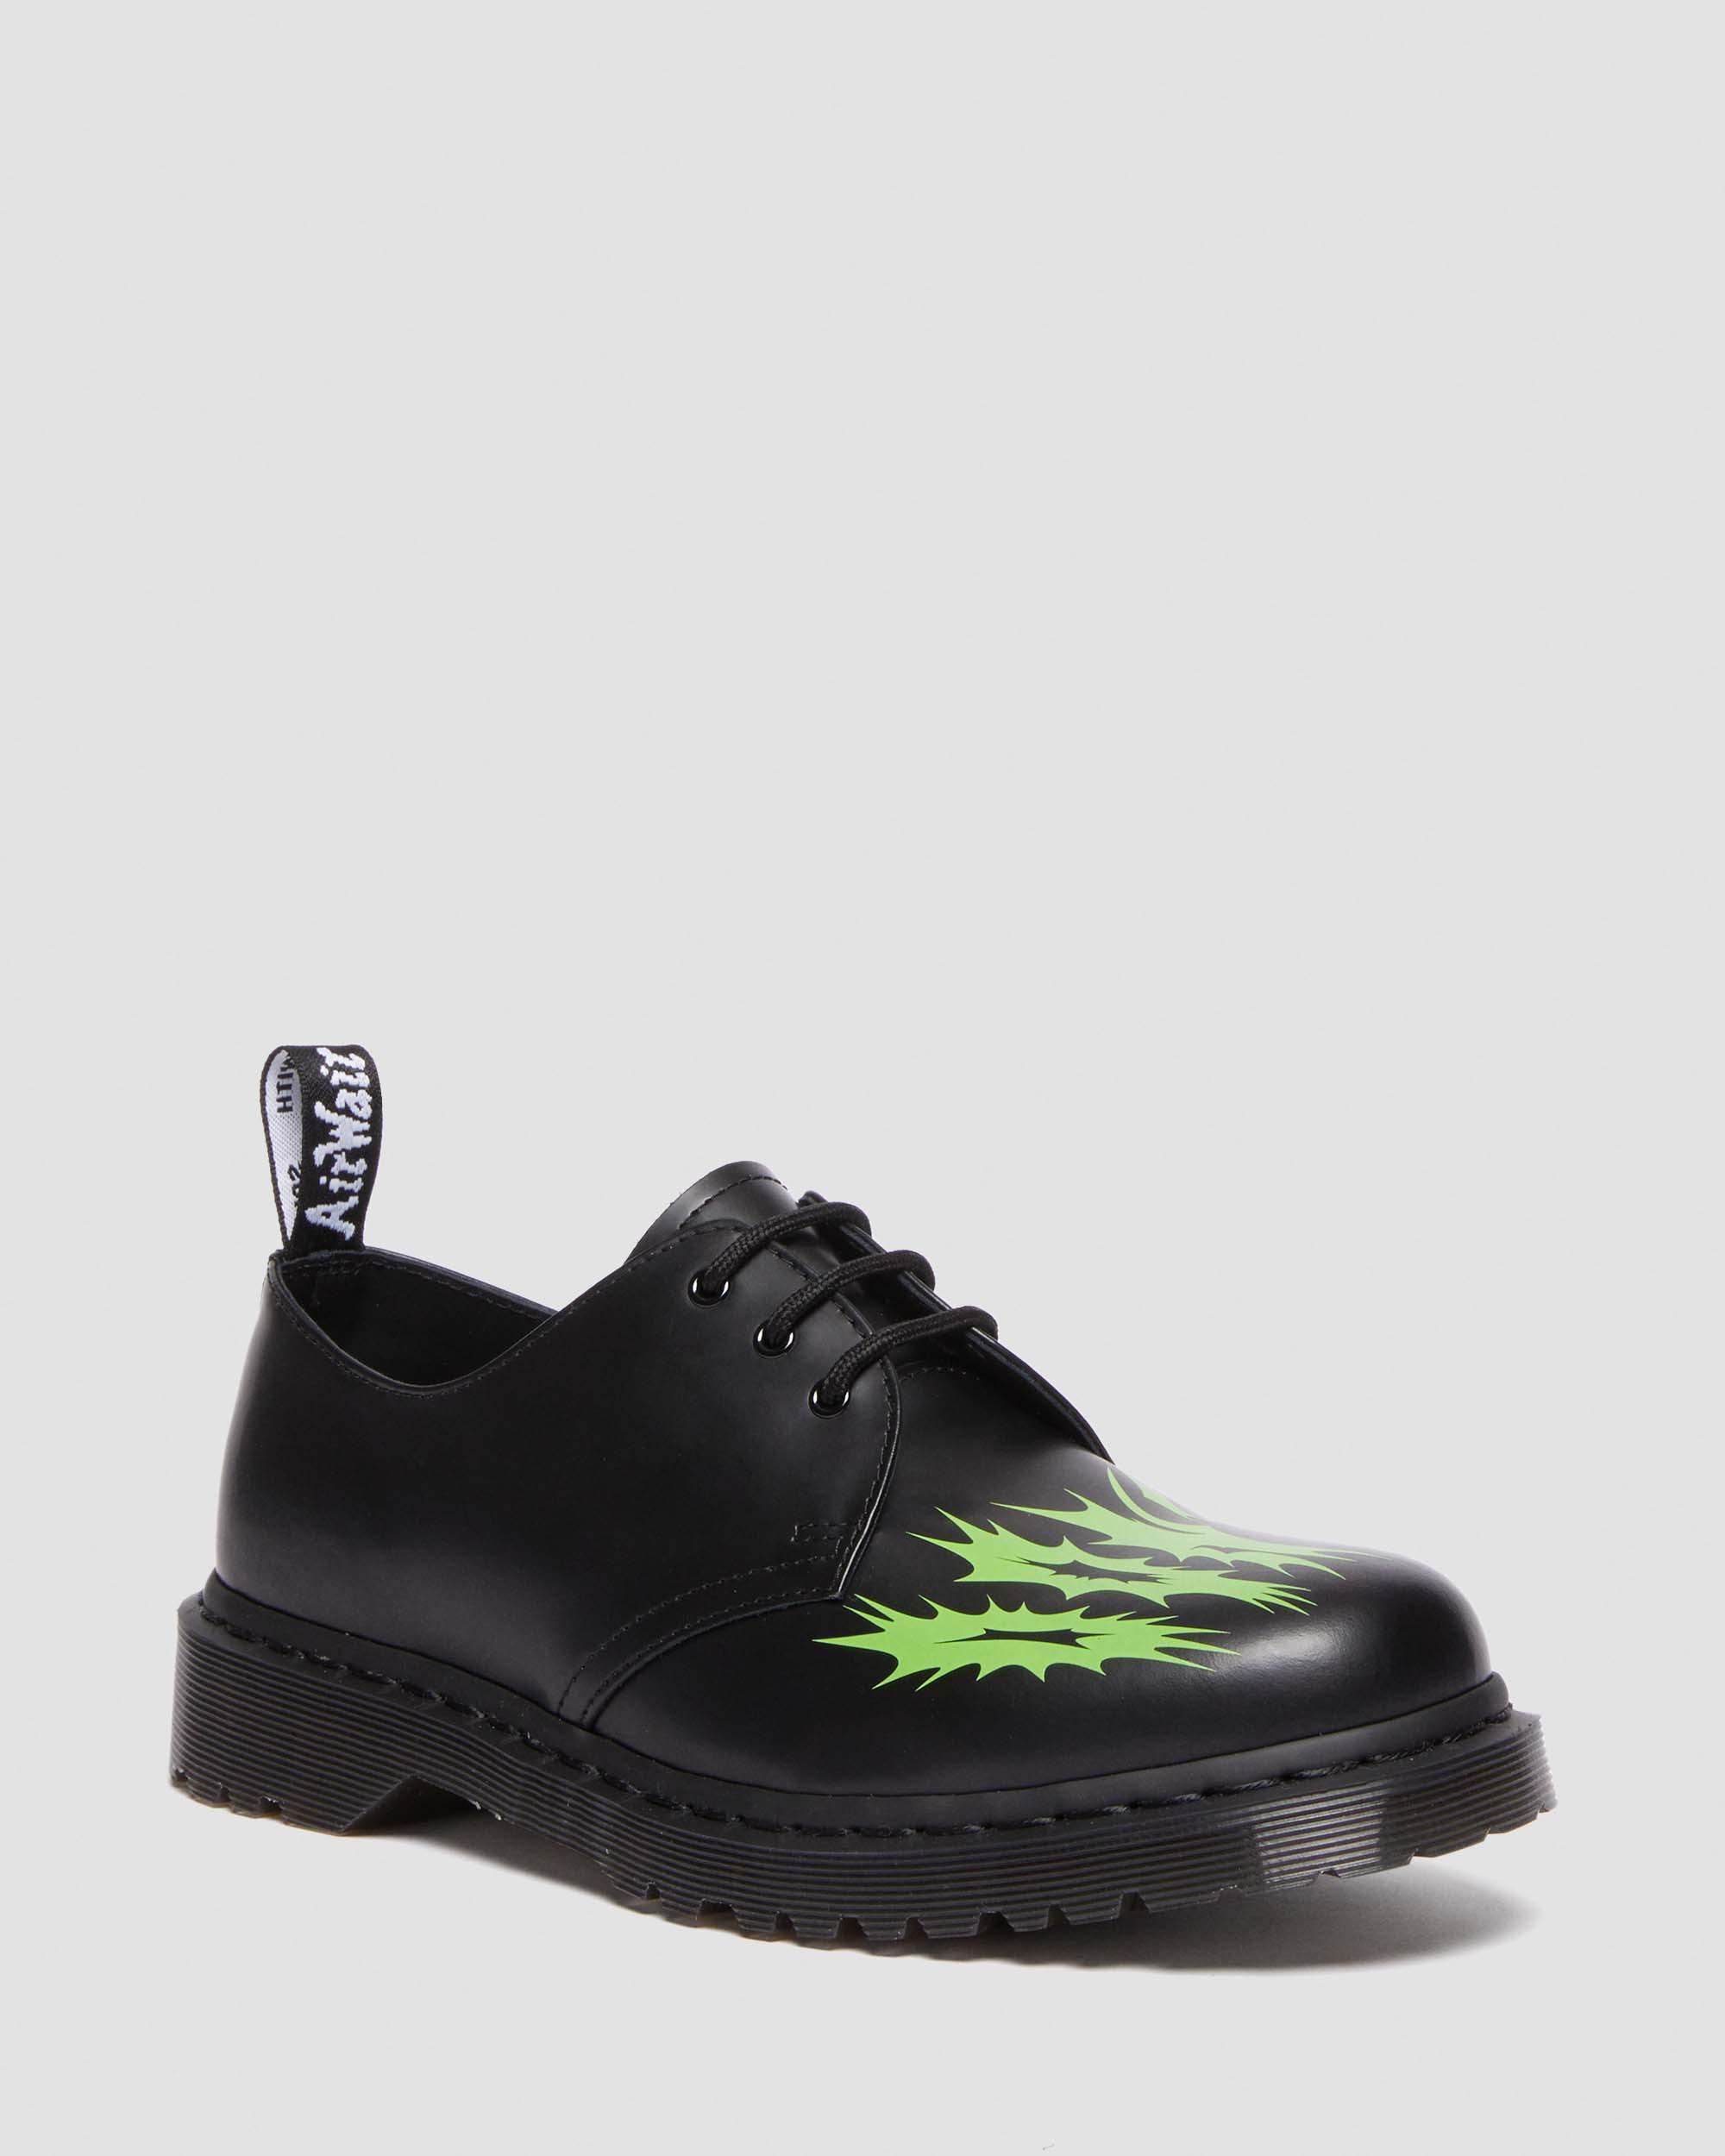 1461 NTS Leather Shoes in Black+Green